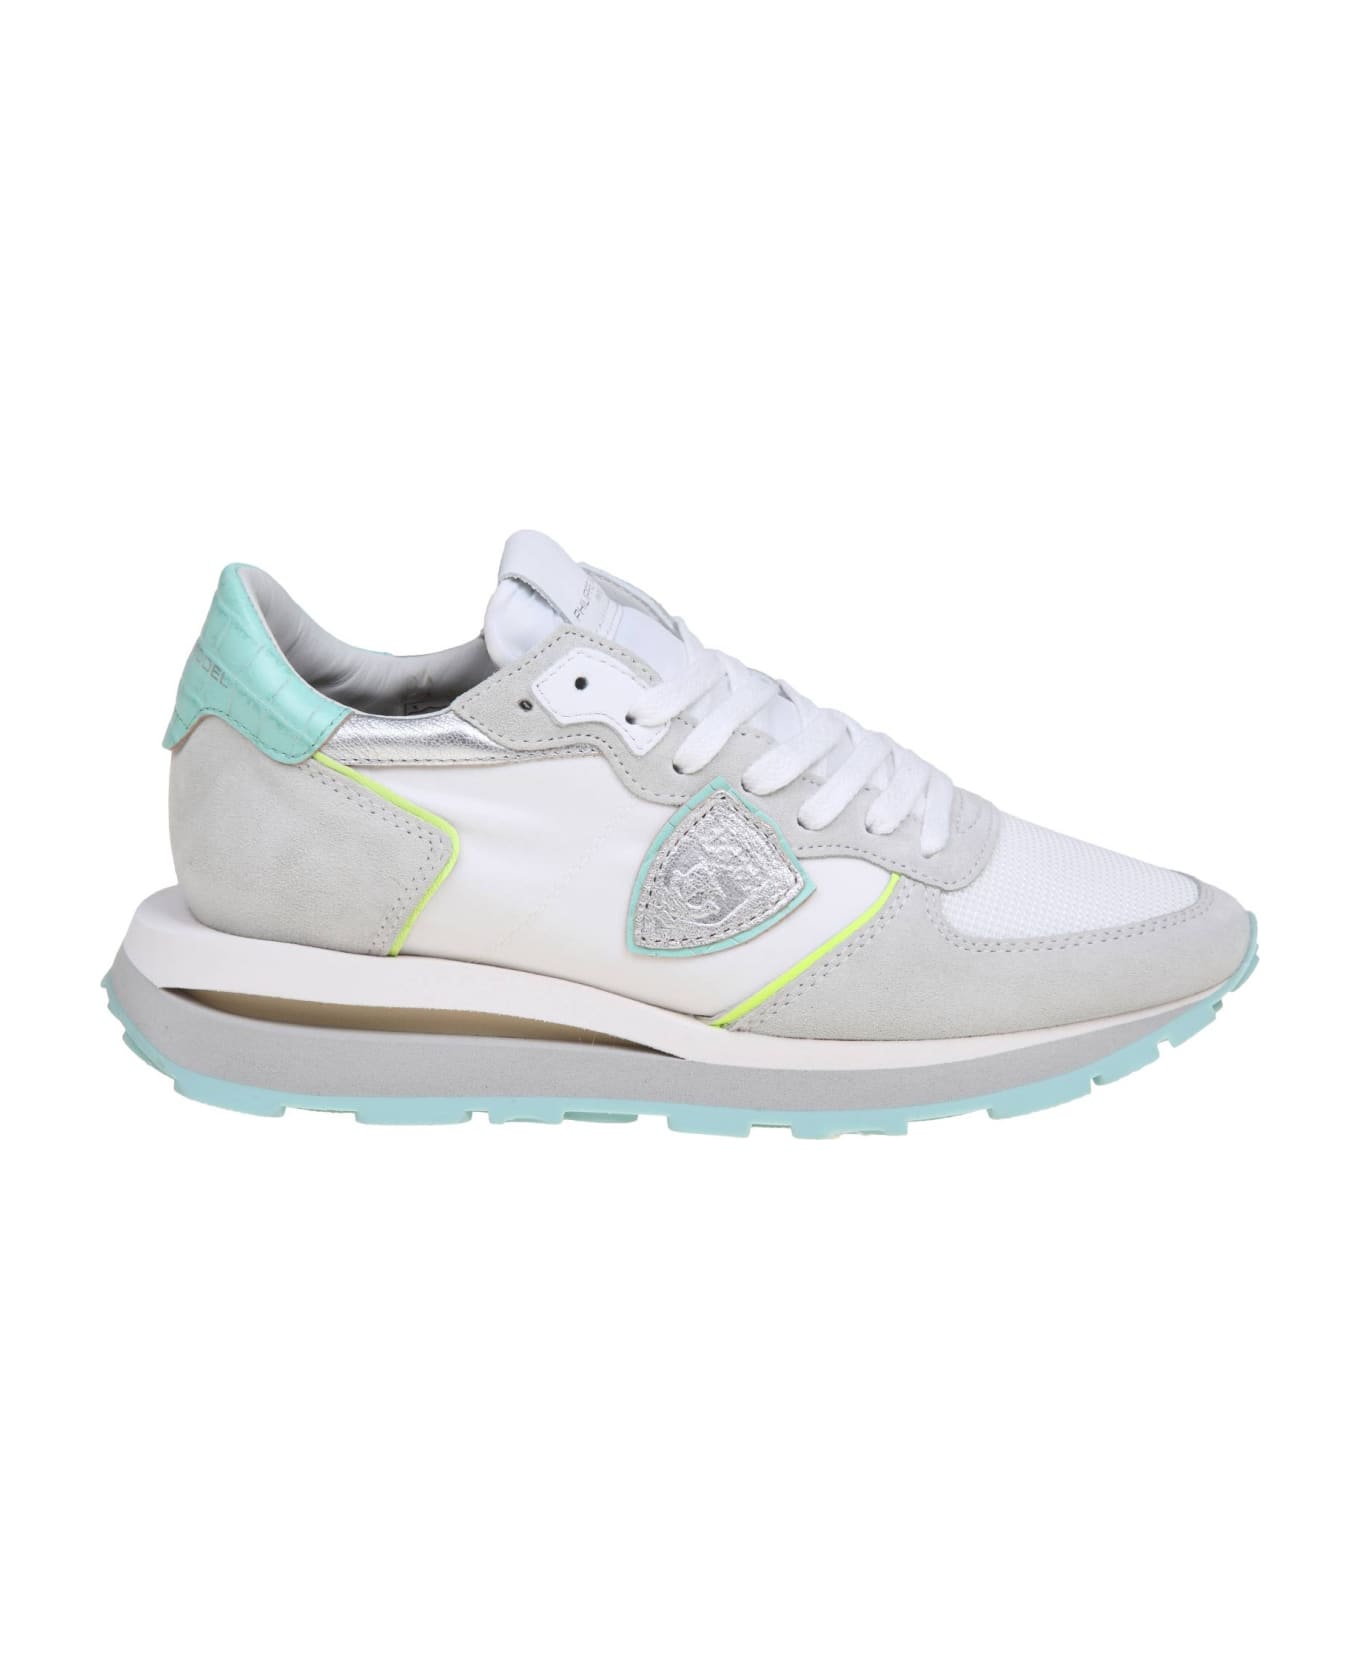 Philippe Model Tropez Sneakers In Suede And Nylon Color White And Turquoise